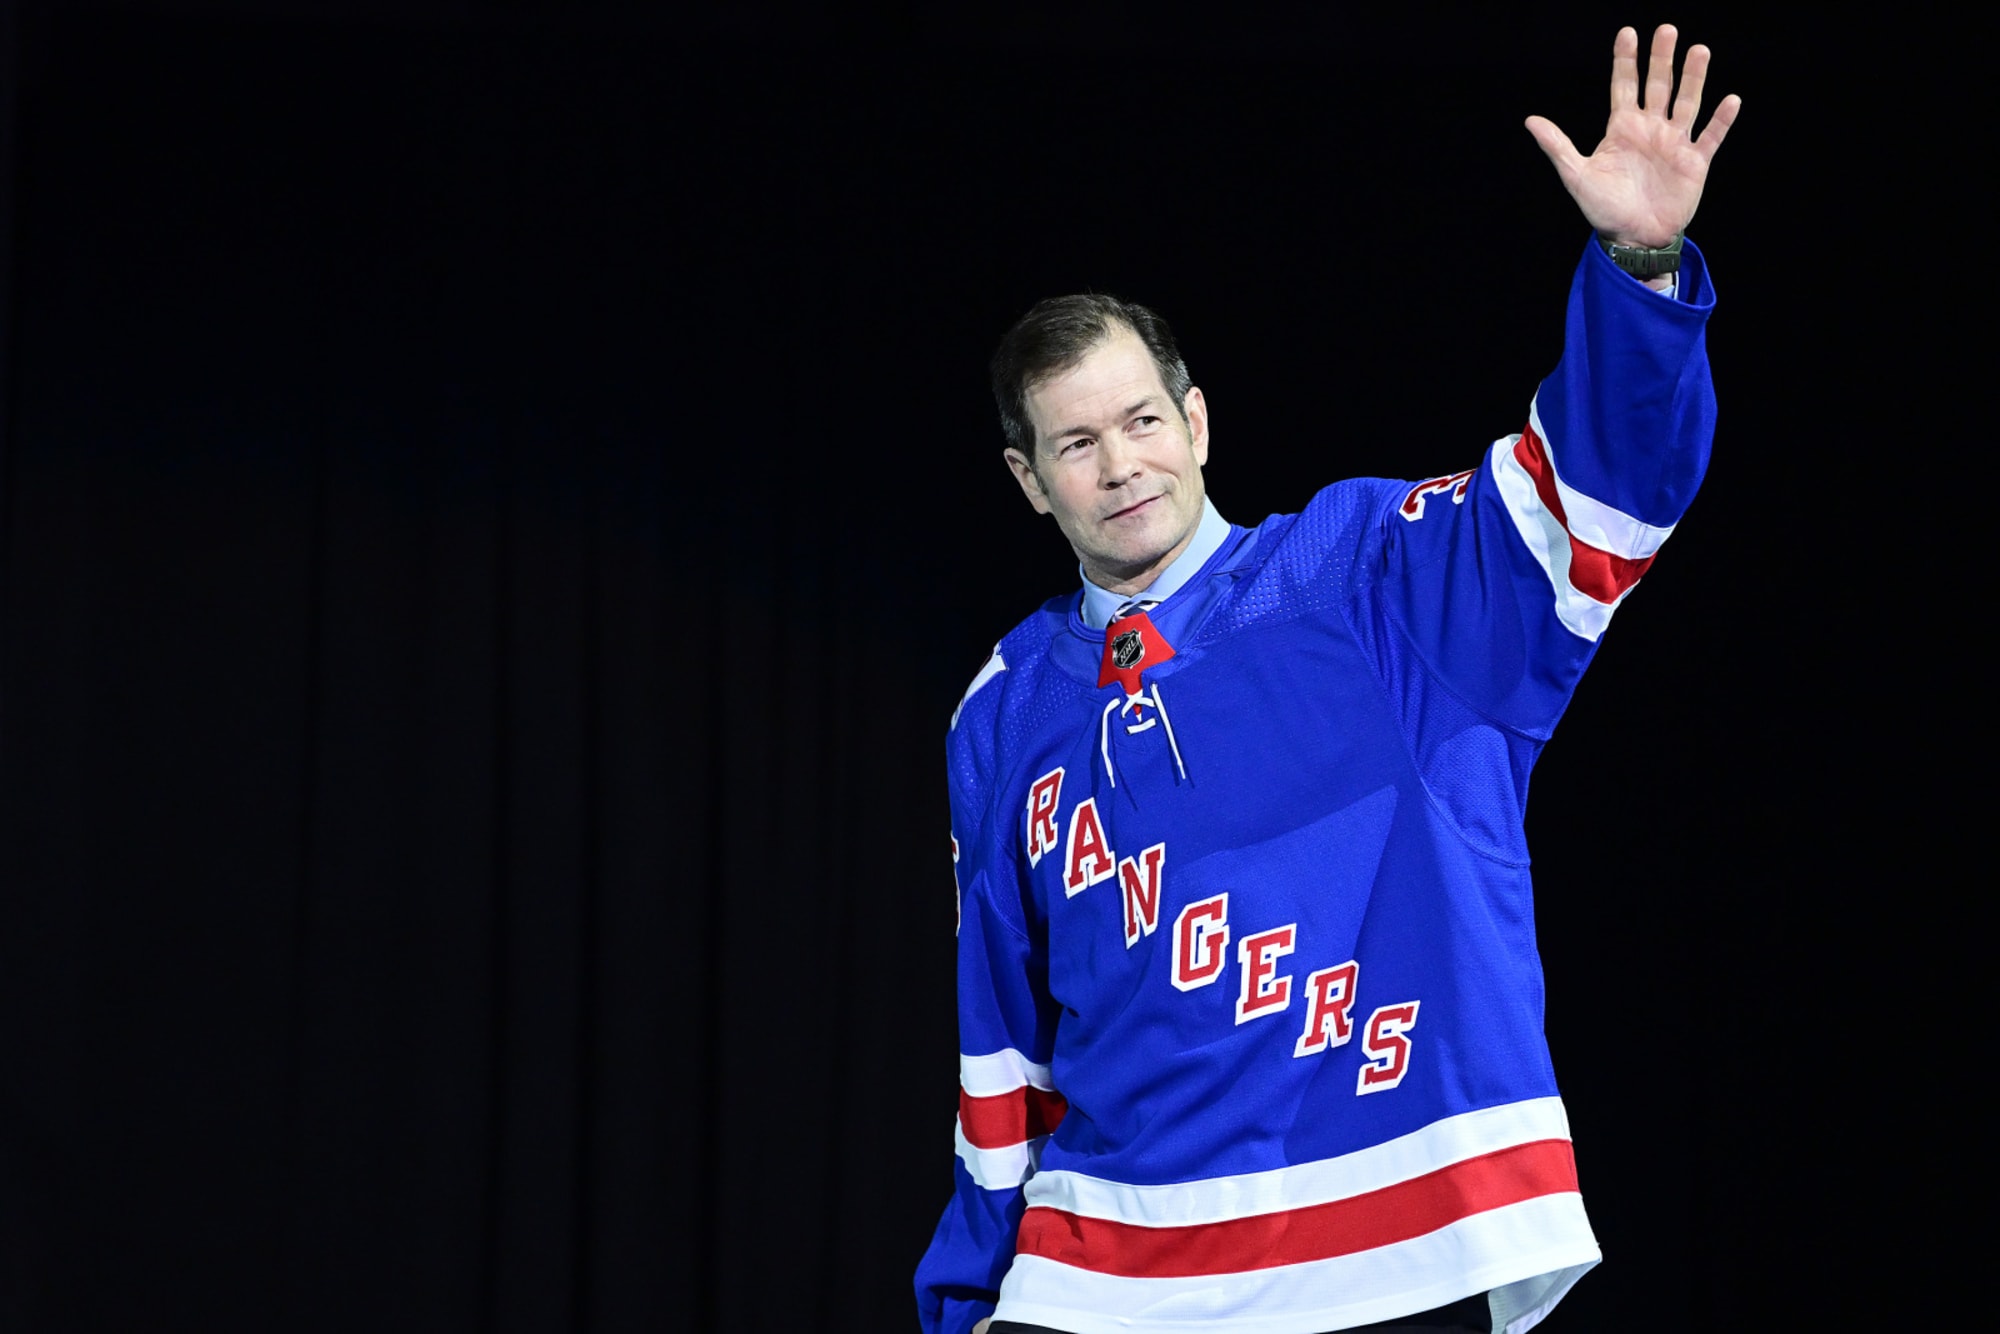 New York Ranger Mike Richter Is Back to Business in the Hudson Valley